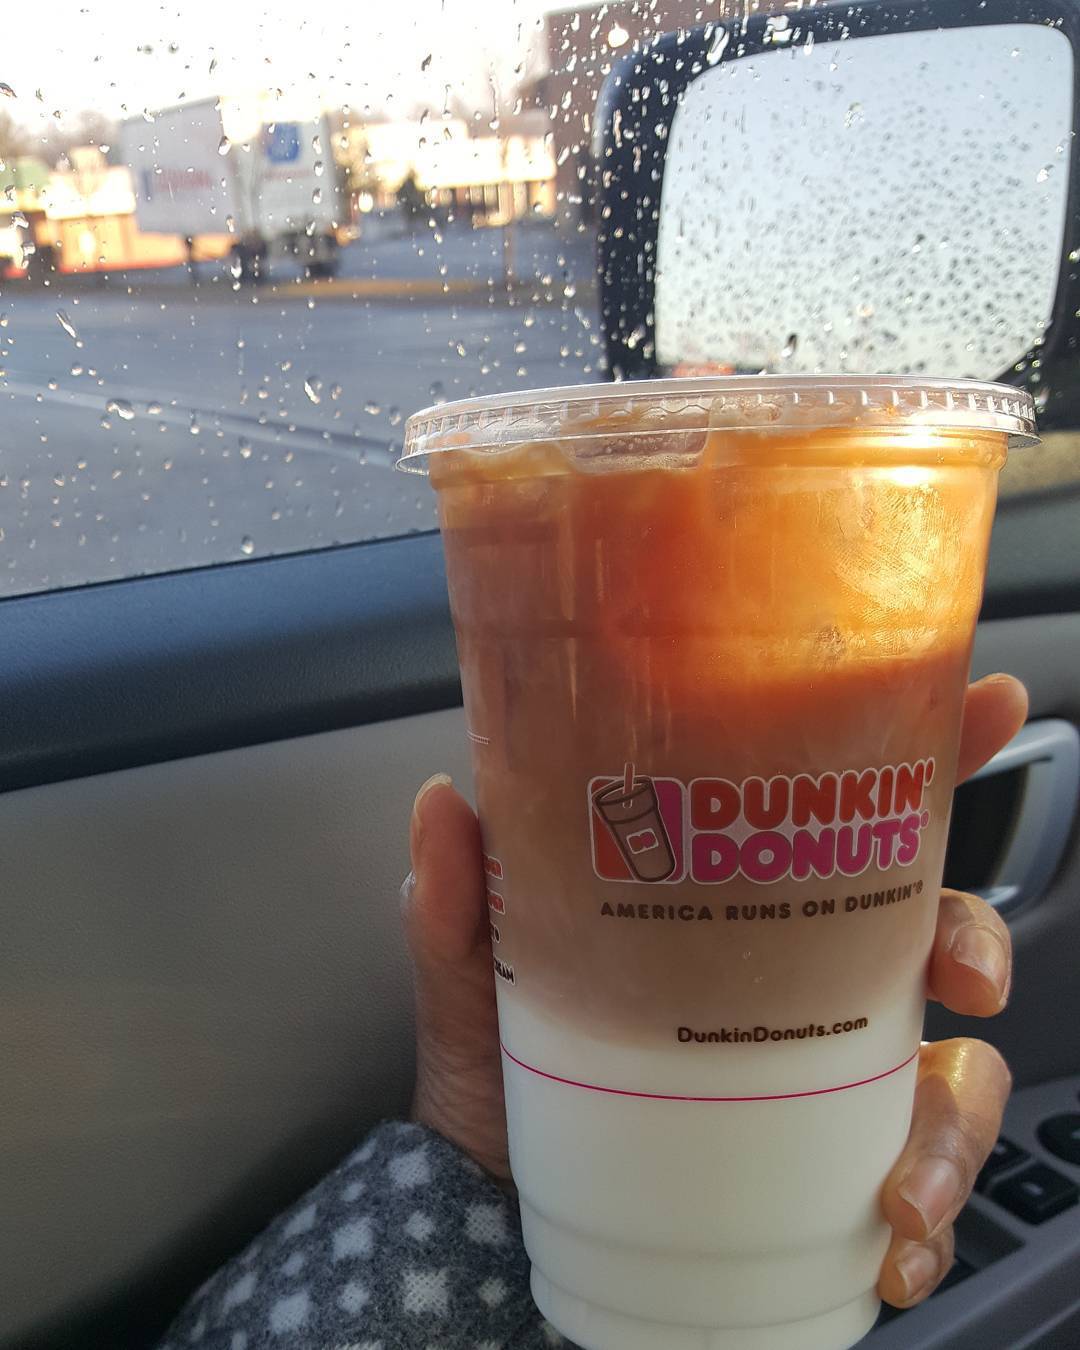 Good morning! Up and at it for a minute, but I figured everyone could use a little morning push/insiration/caffeine. A bright and beautifully inspiring day to say I Do. Congrats Miriam and Trinidad! #silverimmersion #nofilter #dunkindonuts #macchiato...